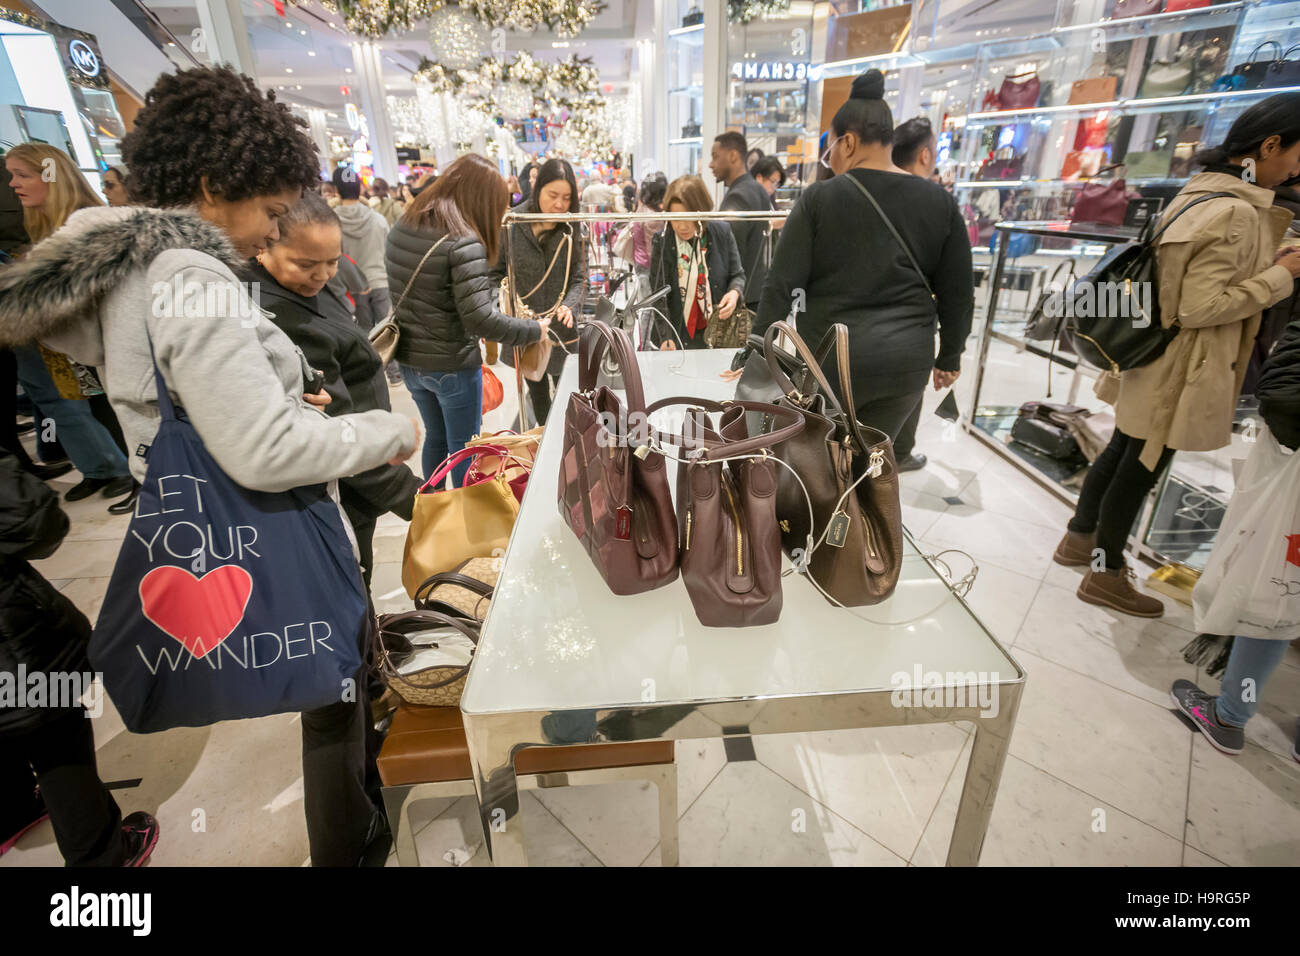 New York, USA. 25th November, 2016. Shoppers browse Michael Kors handbags  in the Macy's Herald Square flagship store in New York looking for bargains  on the day after Thanksgiving, Black Friday, November